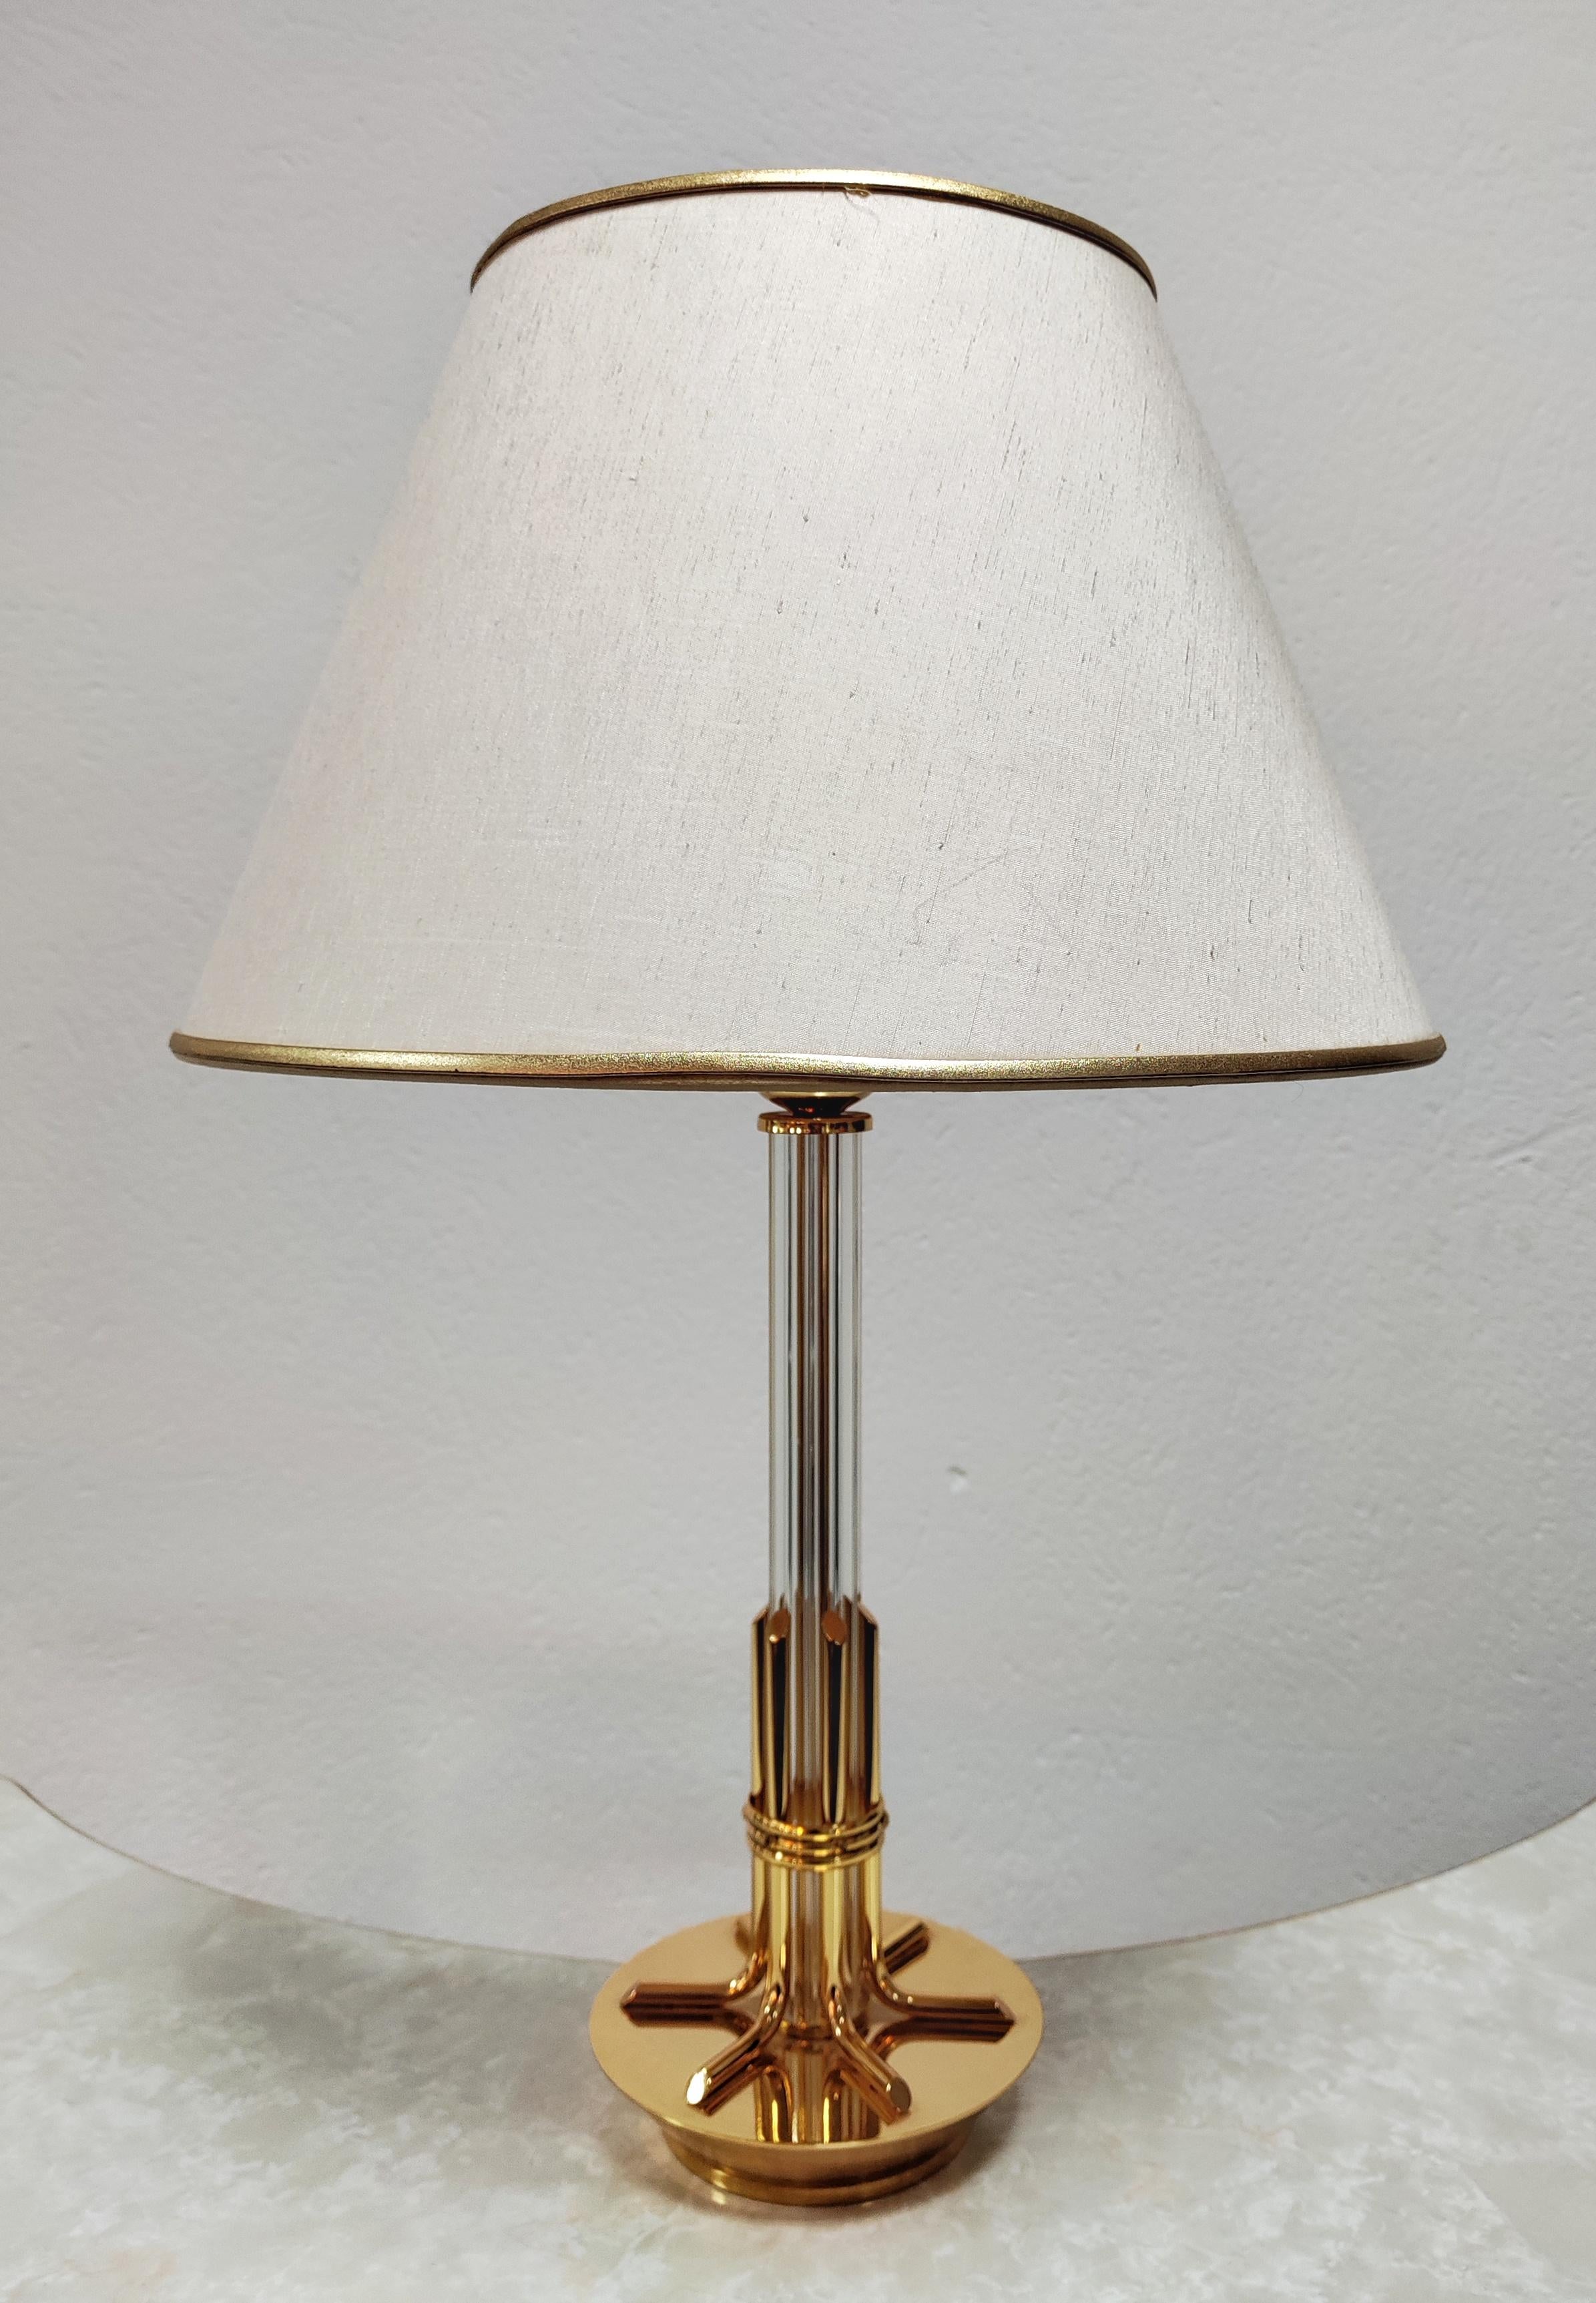 In this listing you will find a very elegant Hollywood Regency table lamp by Solken Leuchten. It features beautiful stand done in combination of lucite and brass and a wide shade. Made in West Germany in 1970s.

Lamp is in good vintage condition